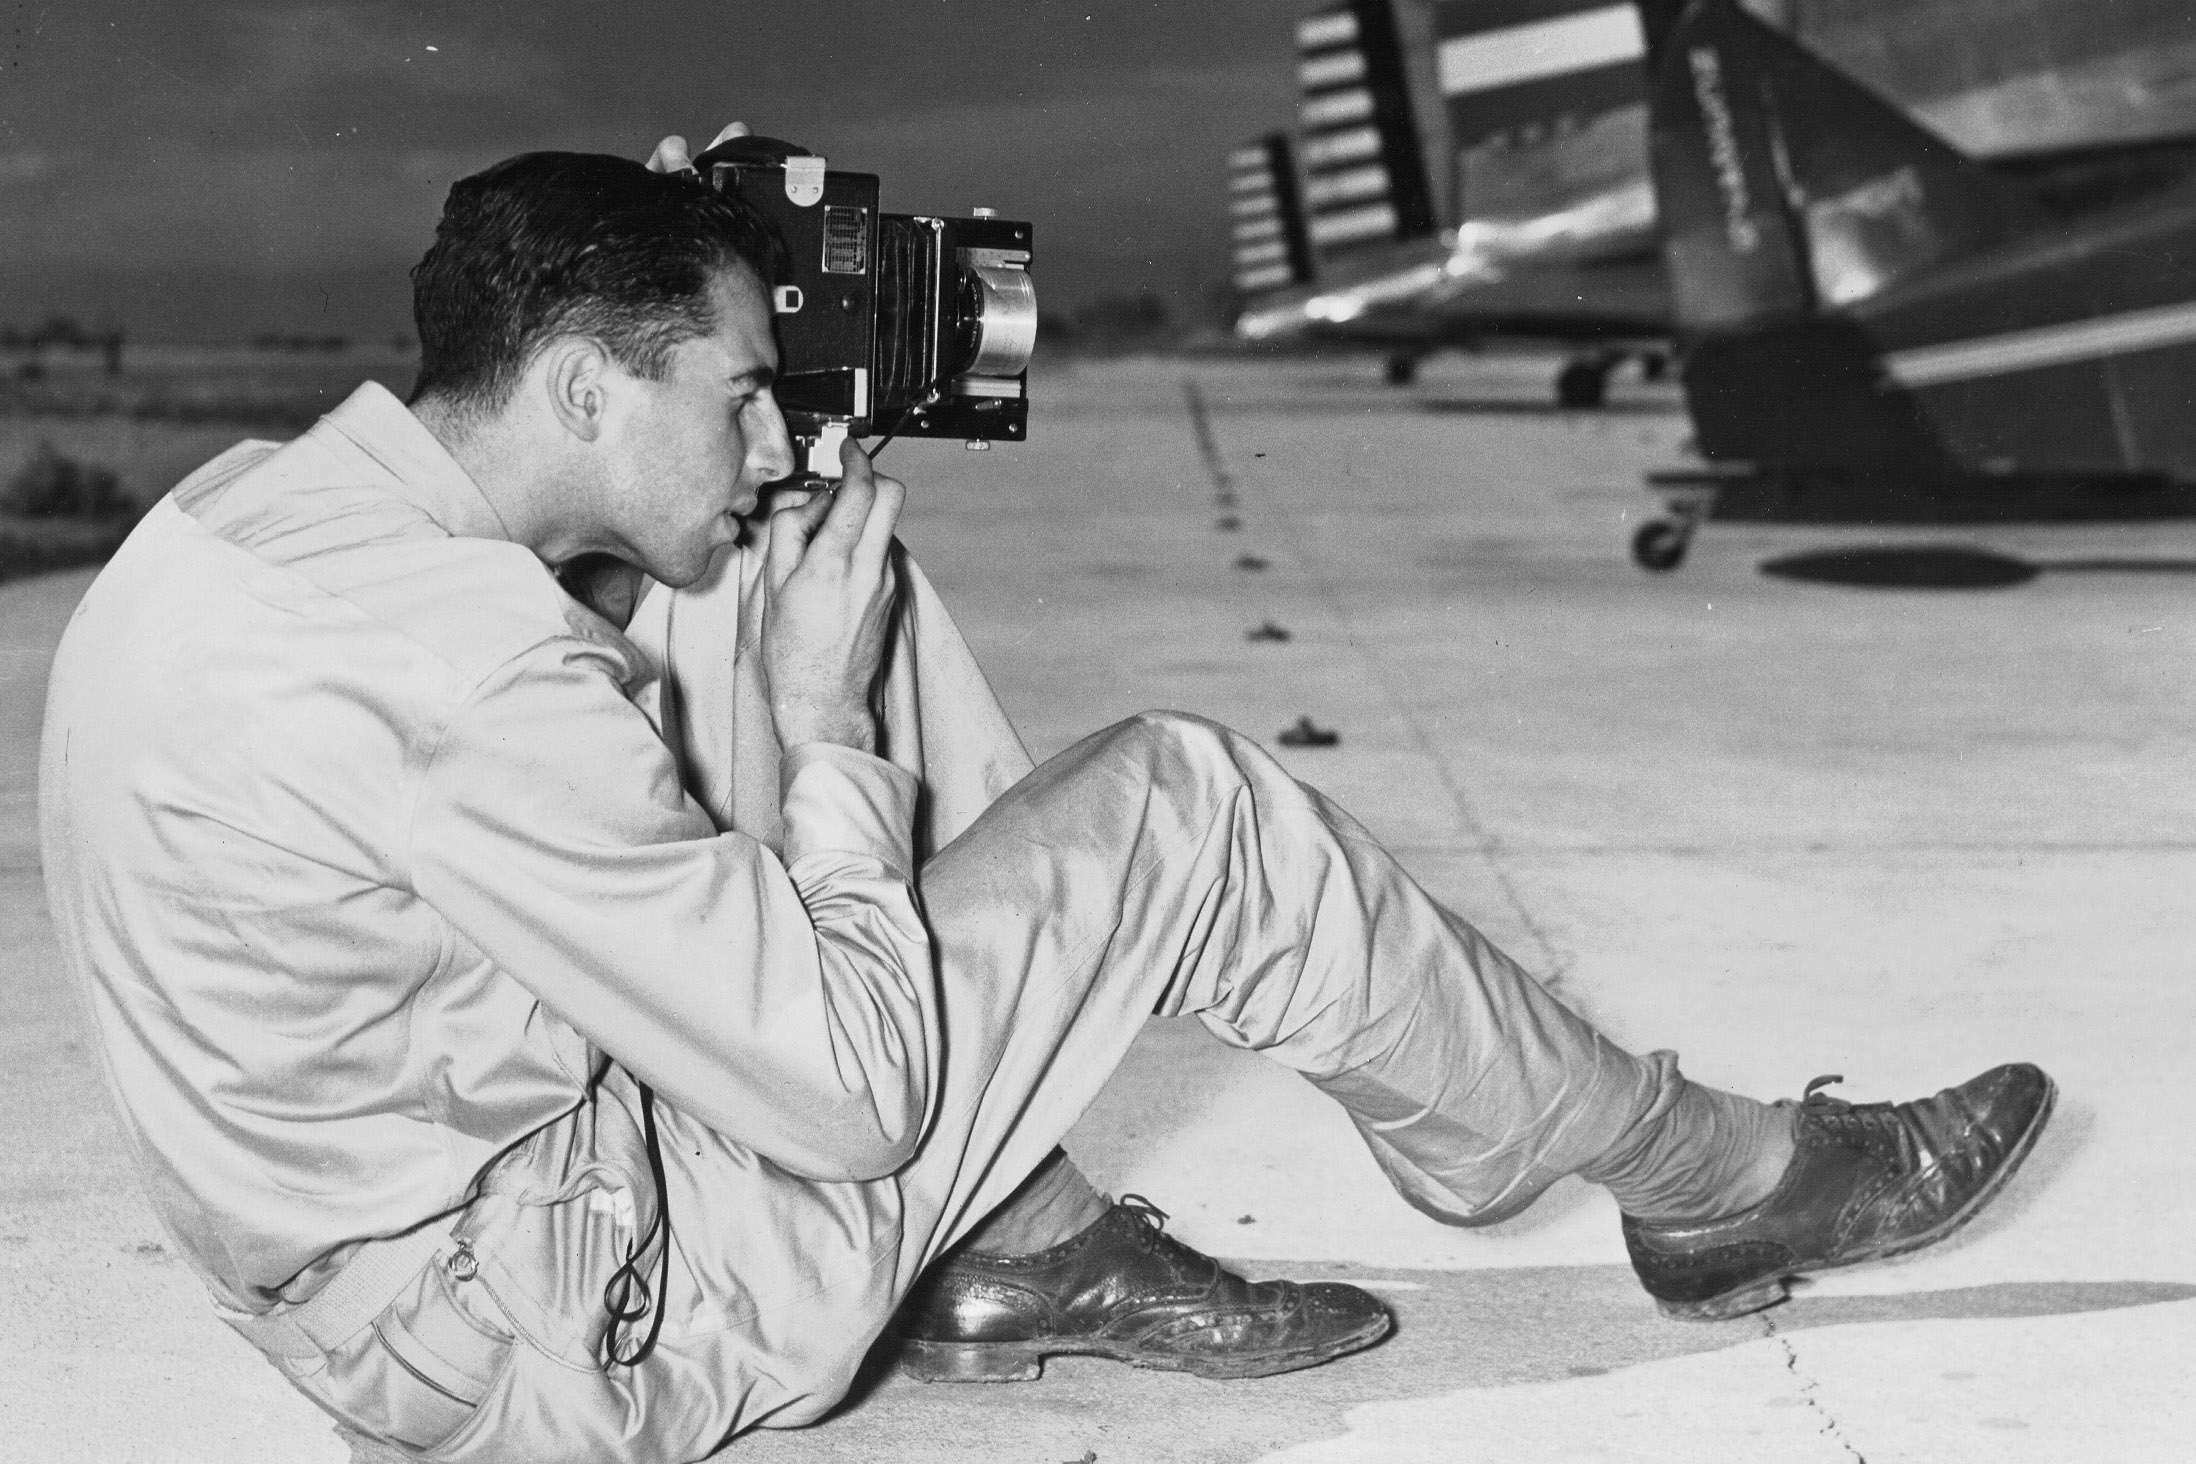 Historic photo of a photography trainee taking photos on a flight line